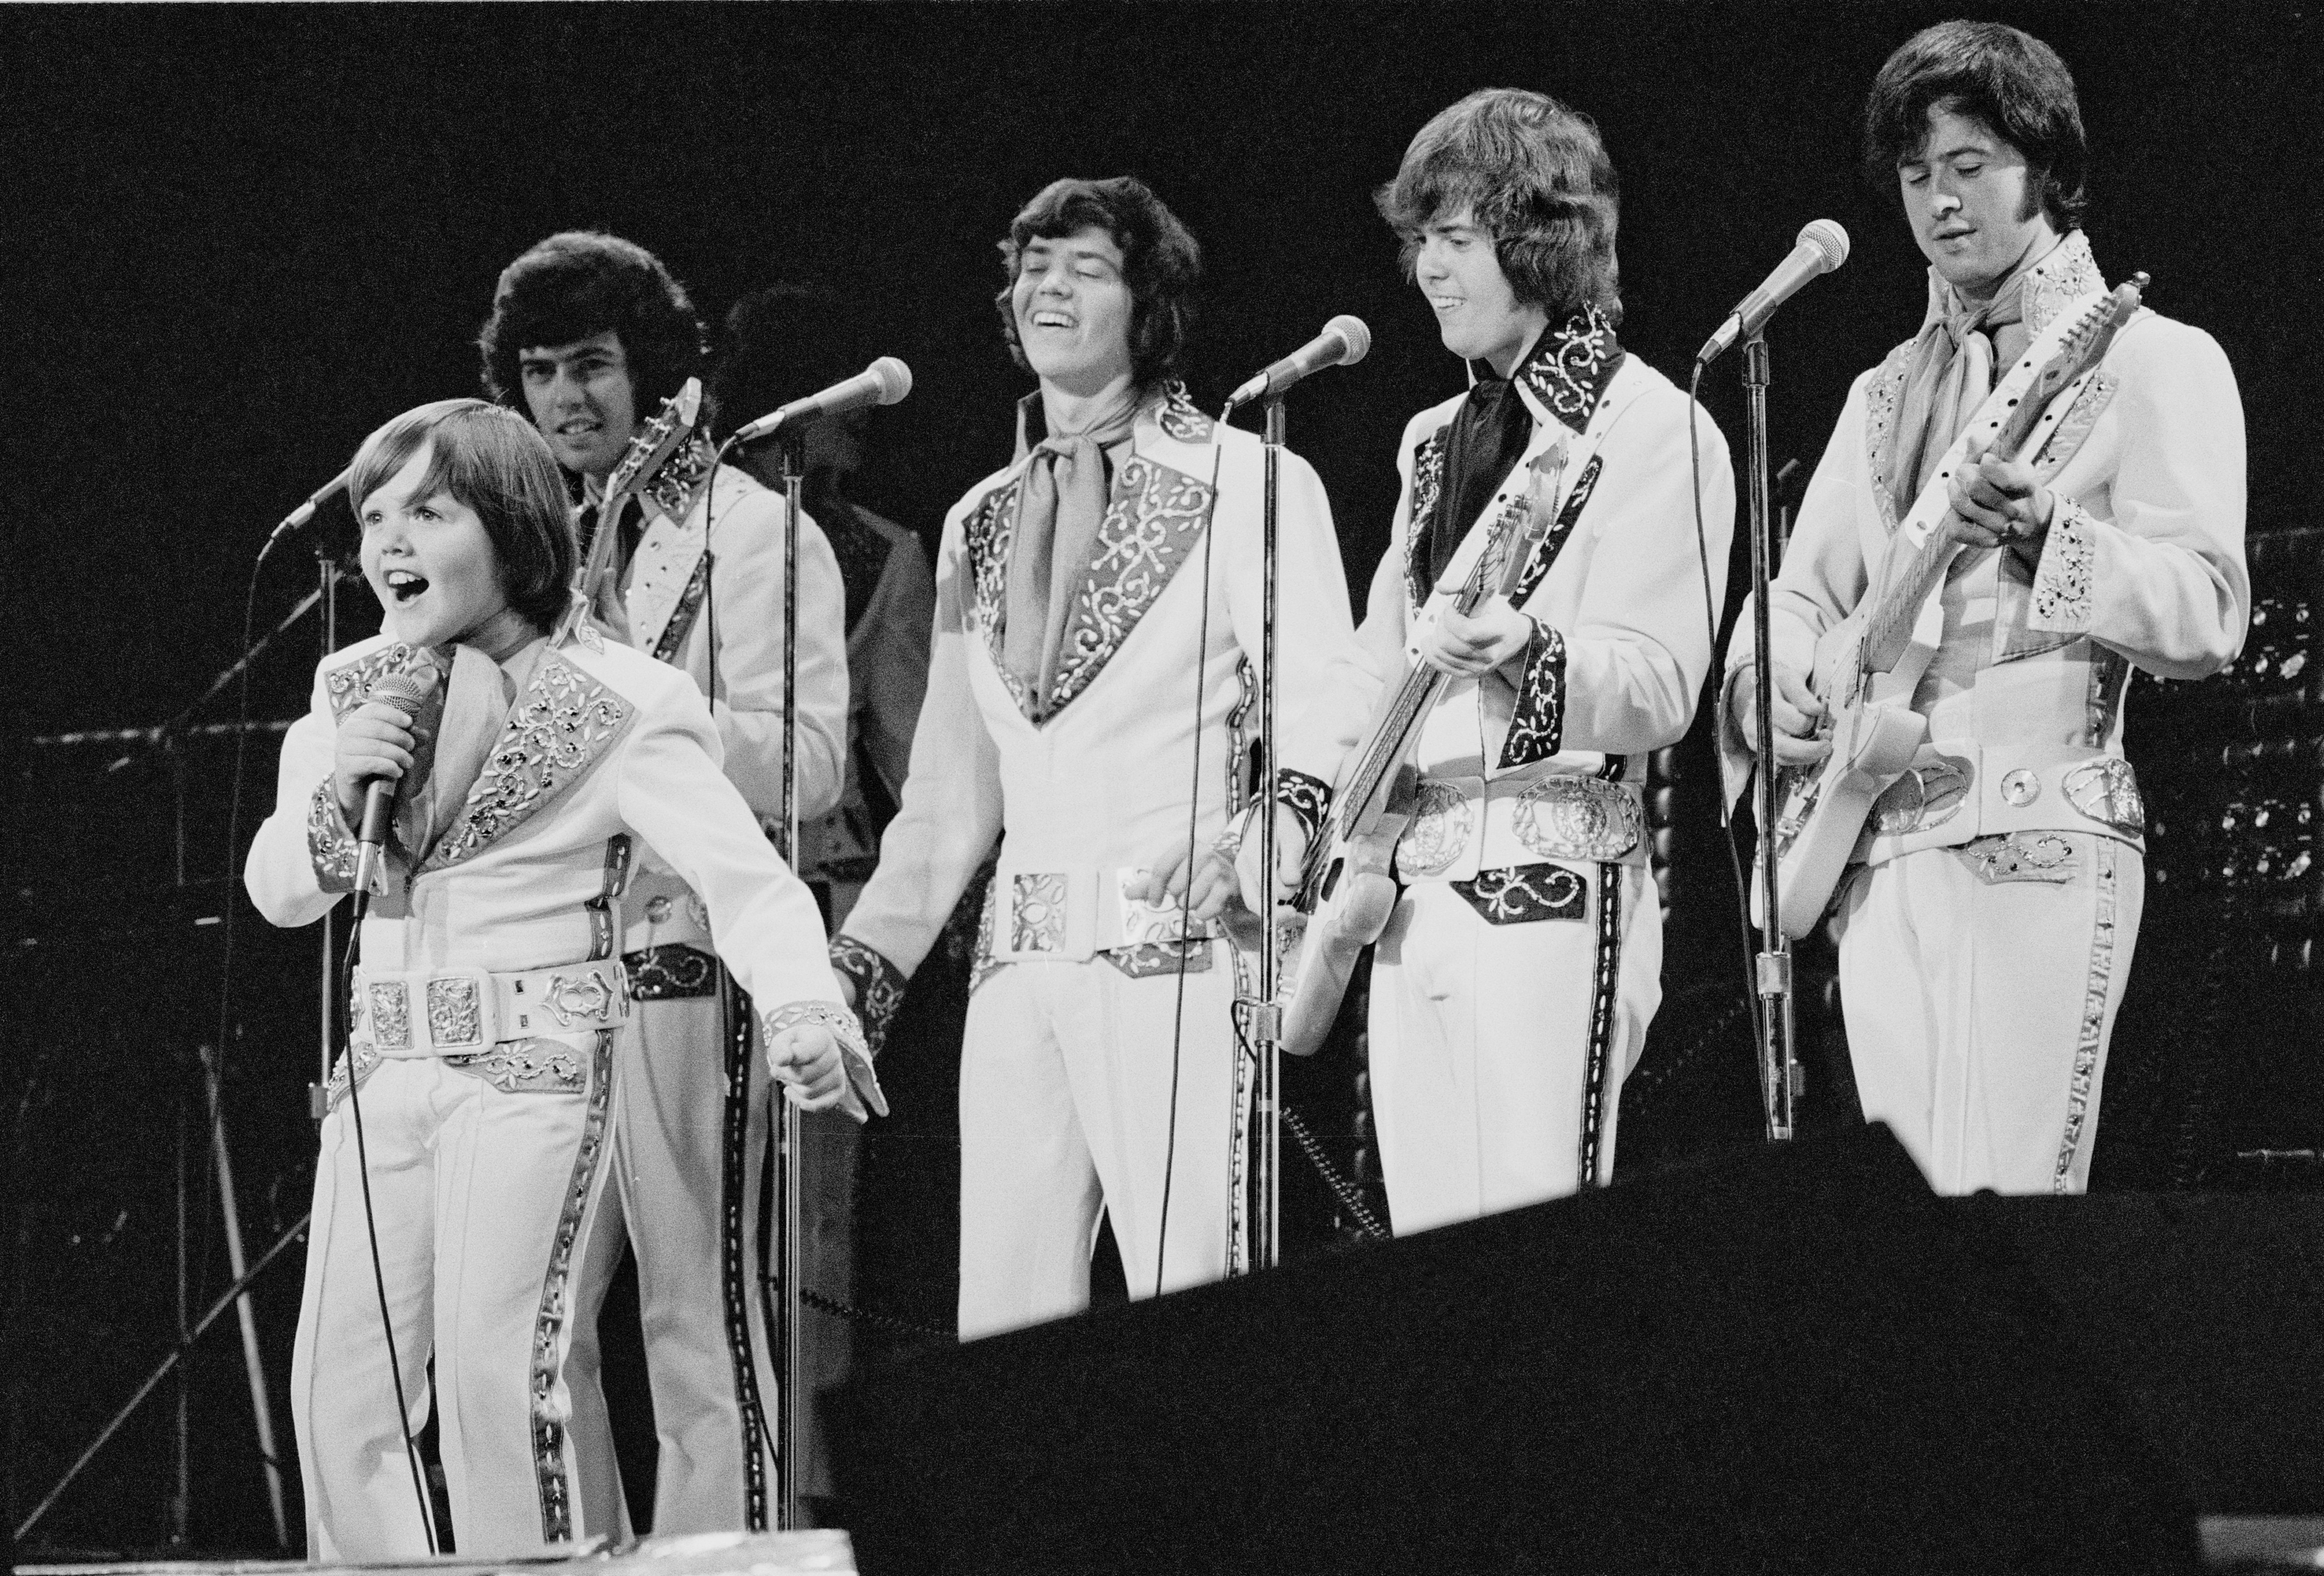 Pop group The Osmonds from: (L-R), Jimmy Osmond, Alan Osmond, Donny Osmond, Merrill Osmond and Wayne Osmond performing at the Rainbow Theatre on November 4, 1972 in London. | Source: Getty Images